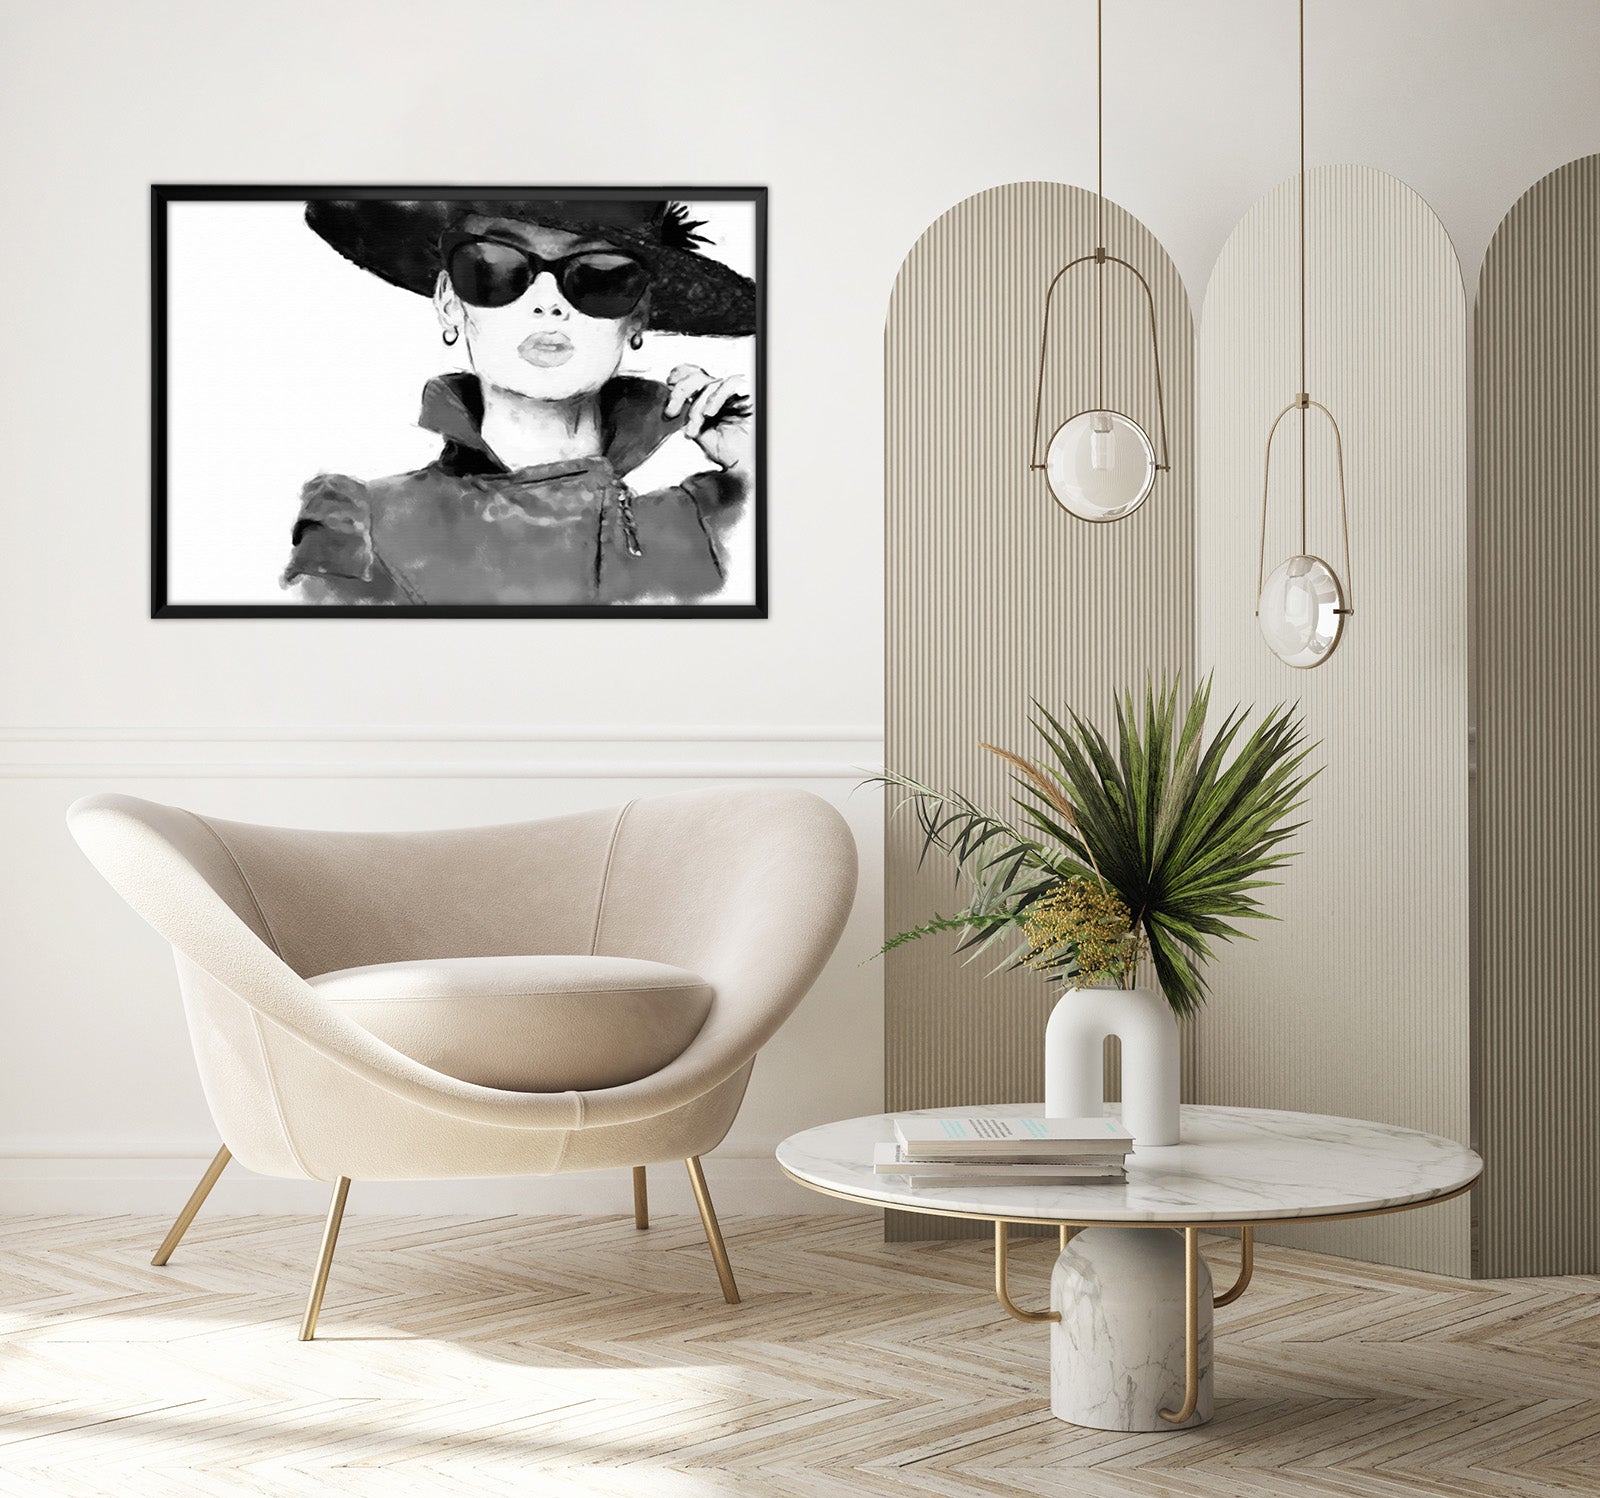 "Canvas Wall Art ( A Woman Wearing an Elegant Hat and Sunglasses) "